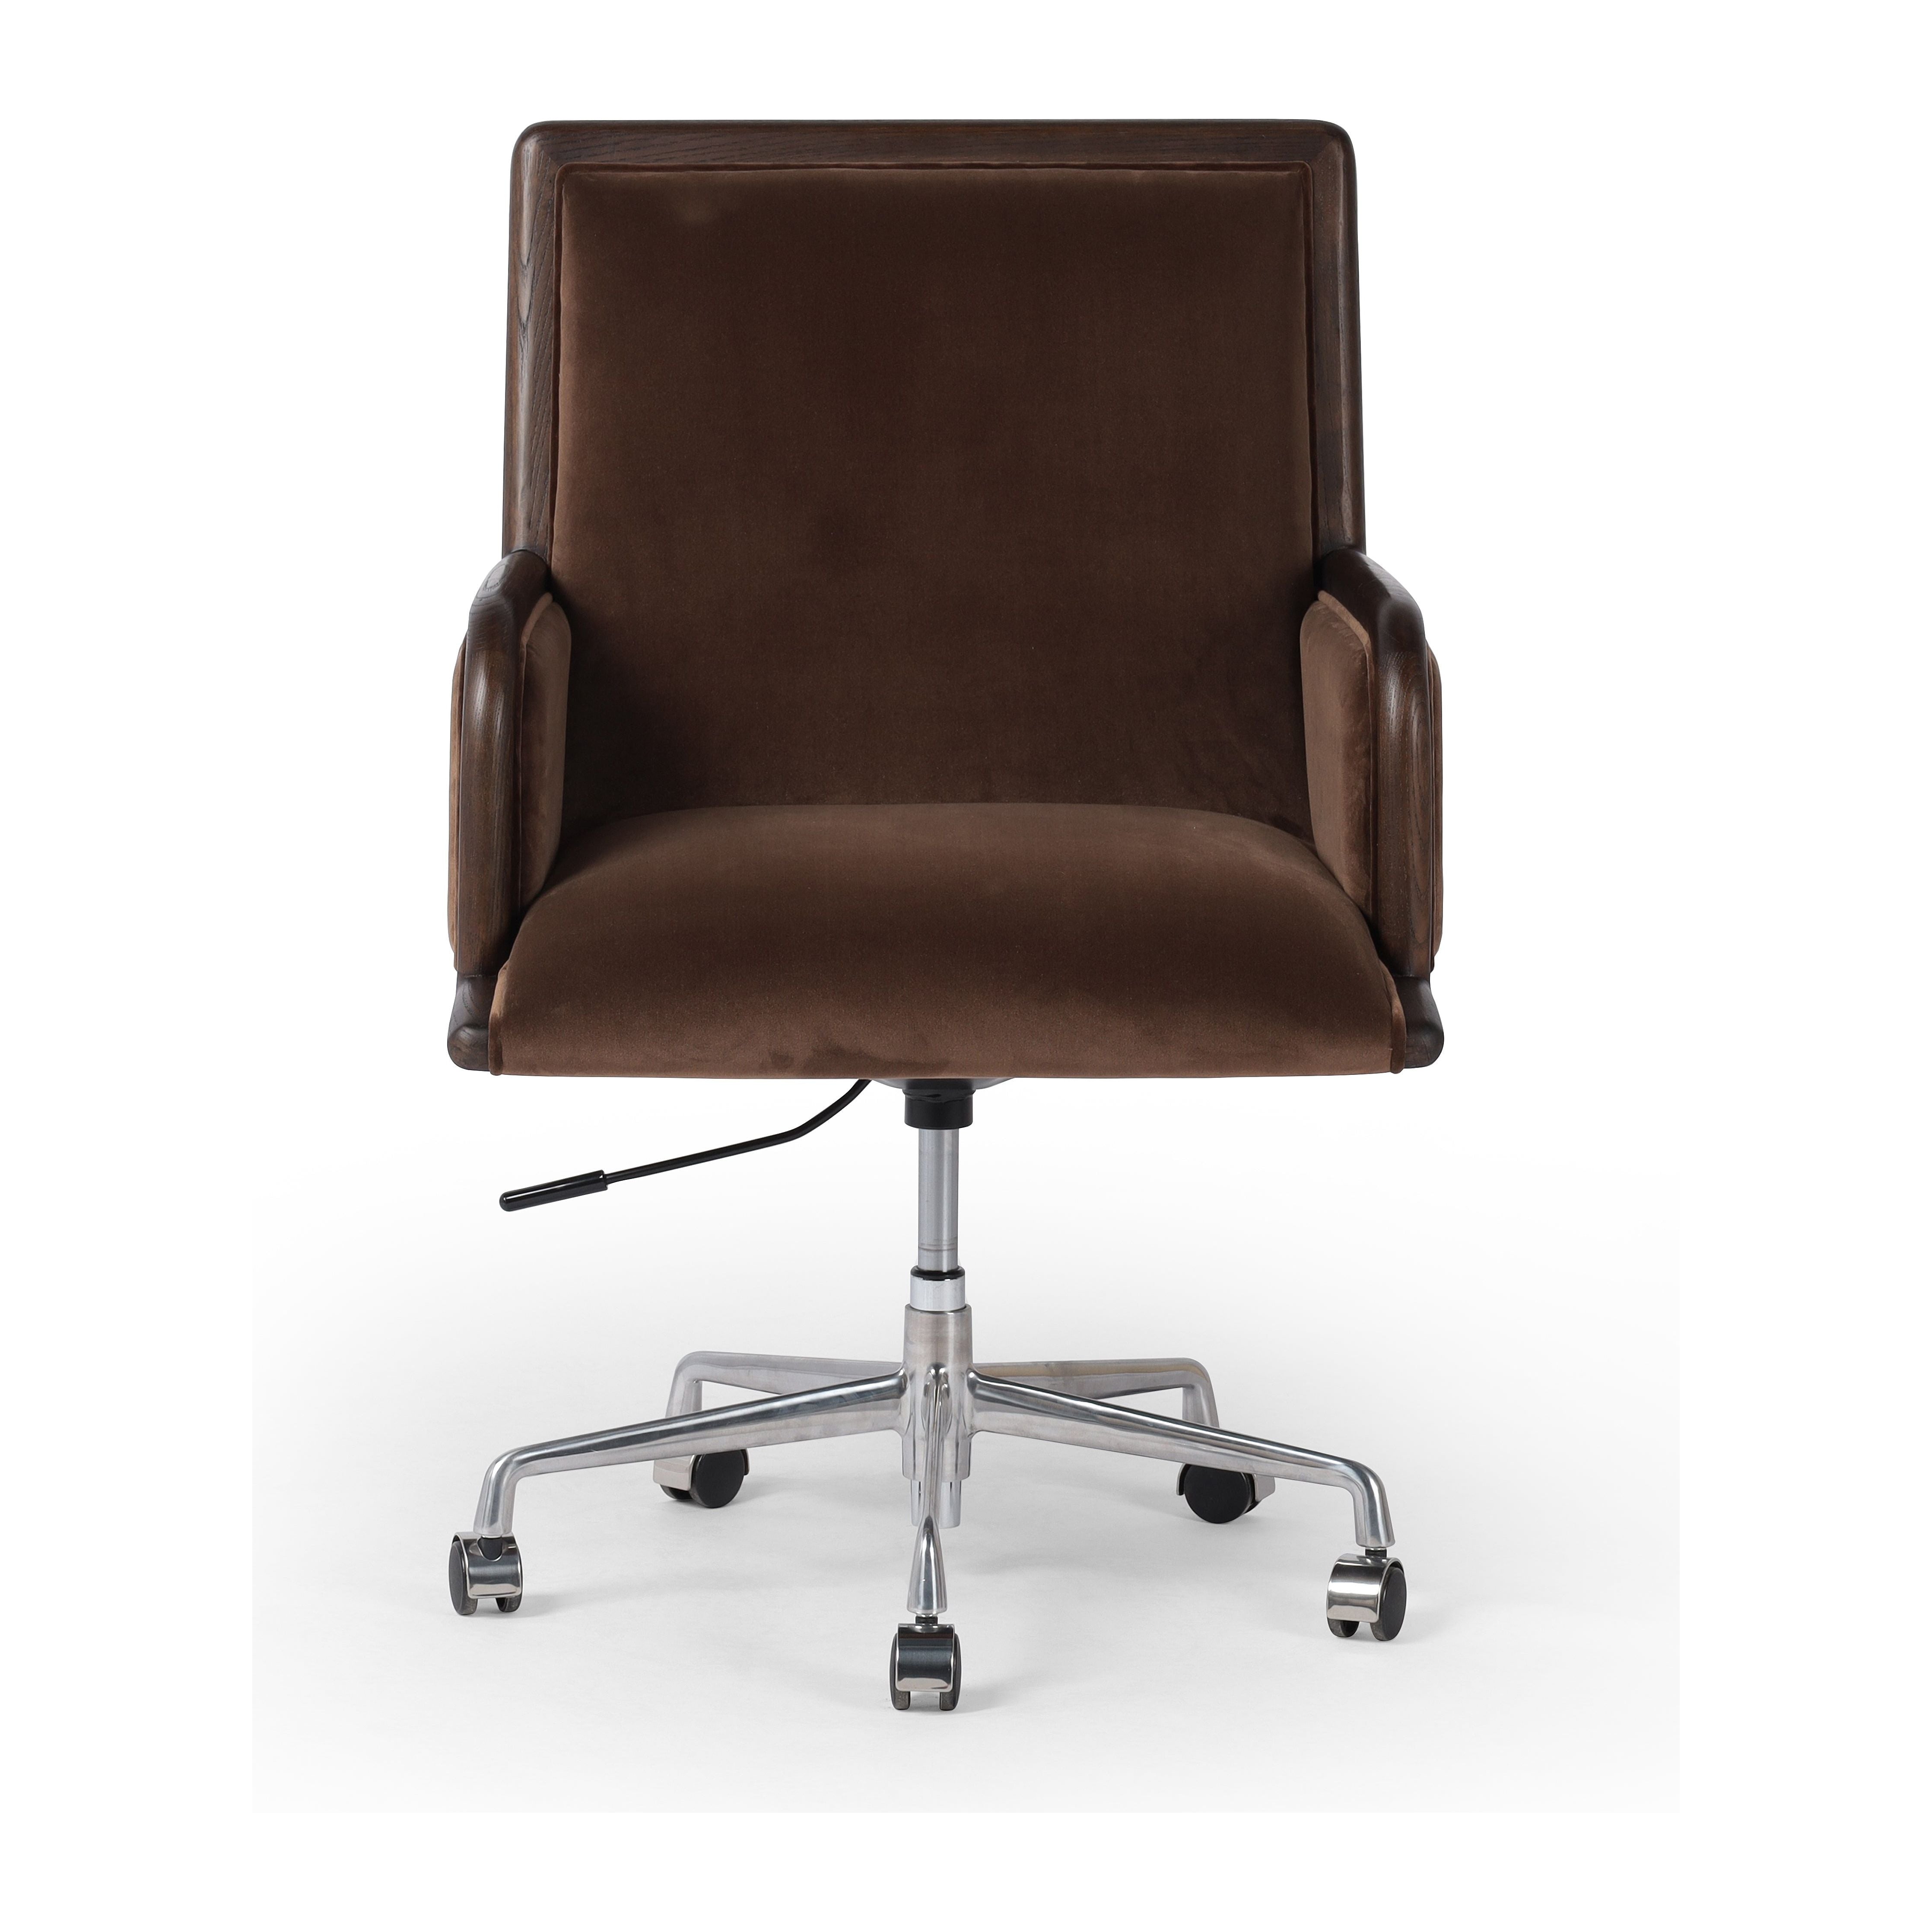 This comfort-driven take on the modern desk chair features velvety cocoa-colored upholstery, pared with a wooden frame. Casters and seat height adjustability for ease as you work. Amethyst Home provides interior design, new construction, custom furniture, and area rugs in the Nashville metro area.